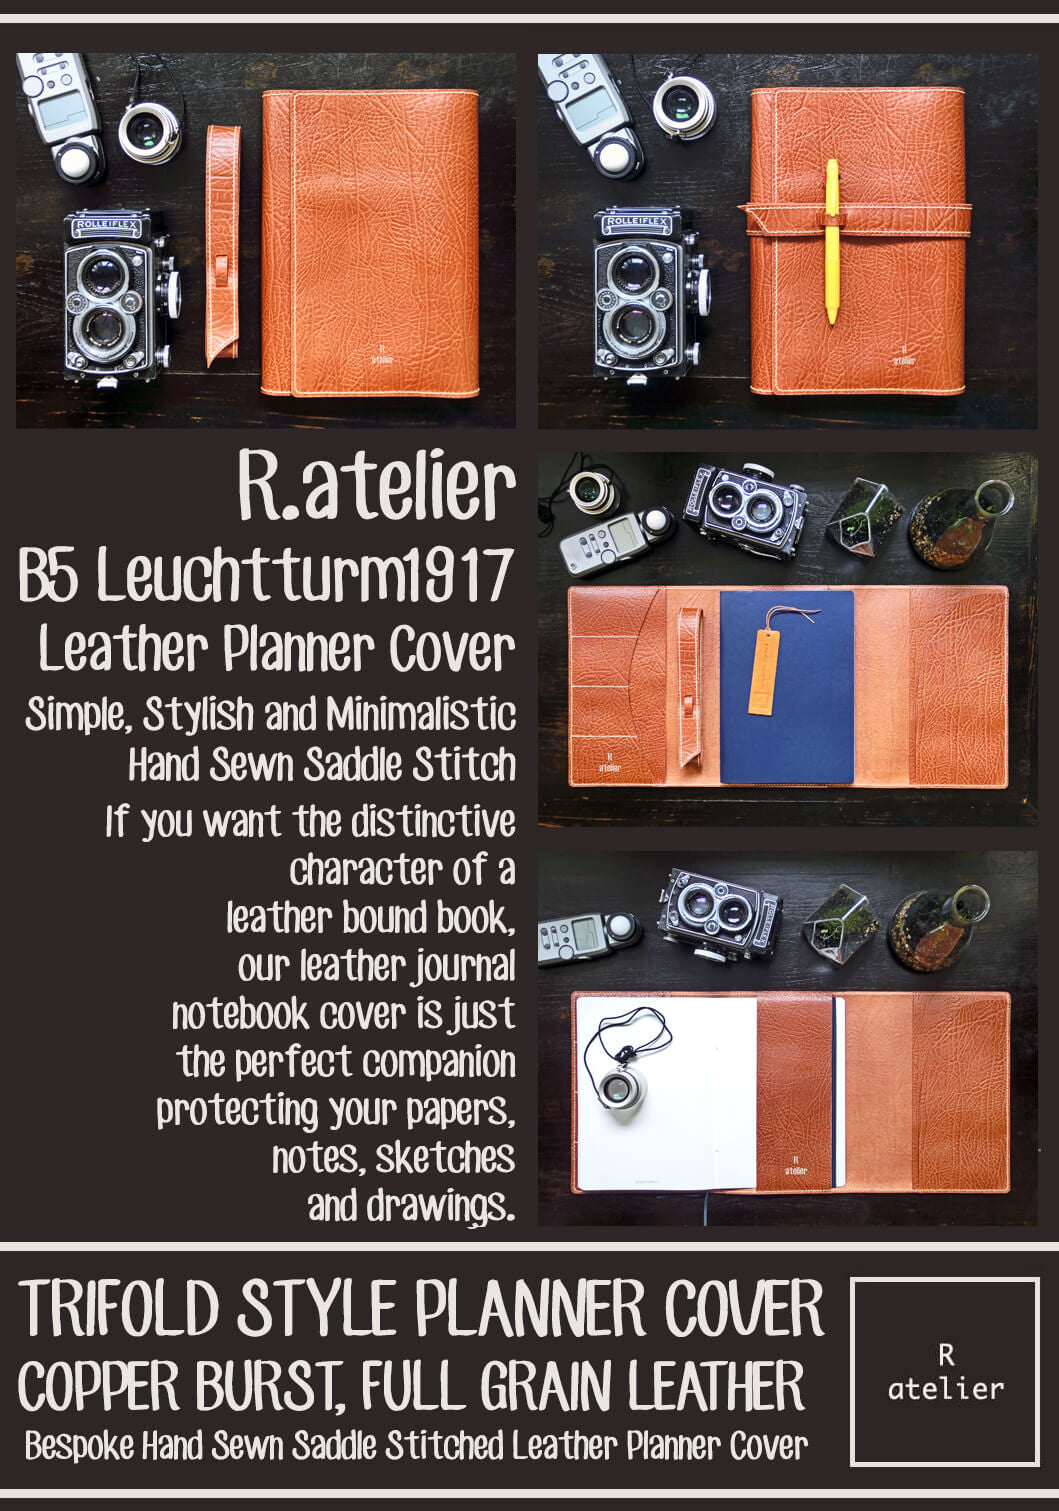 R.atelier B5 Trifold Leuchtturm1917 Leather Planner Cover